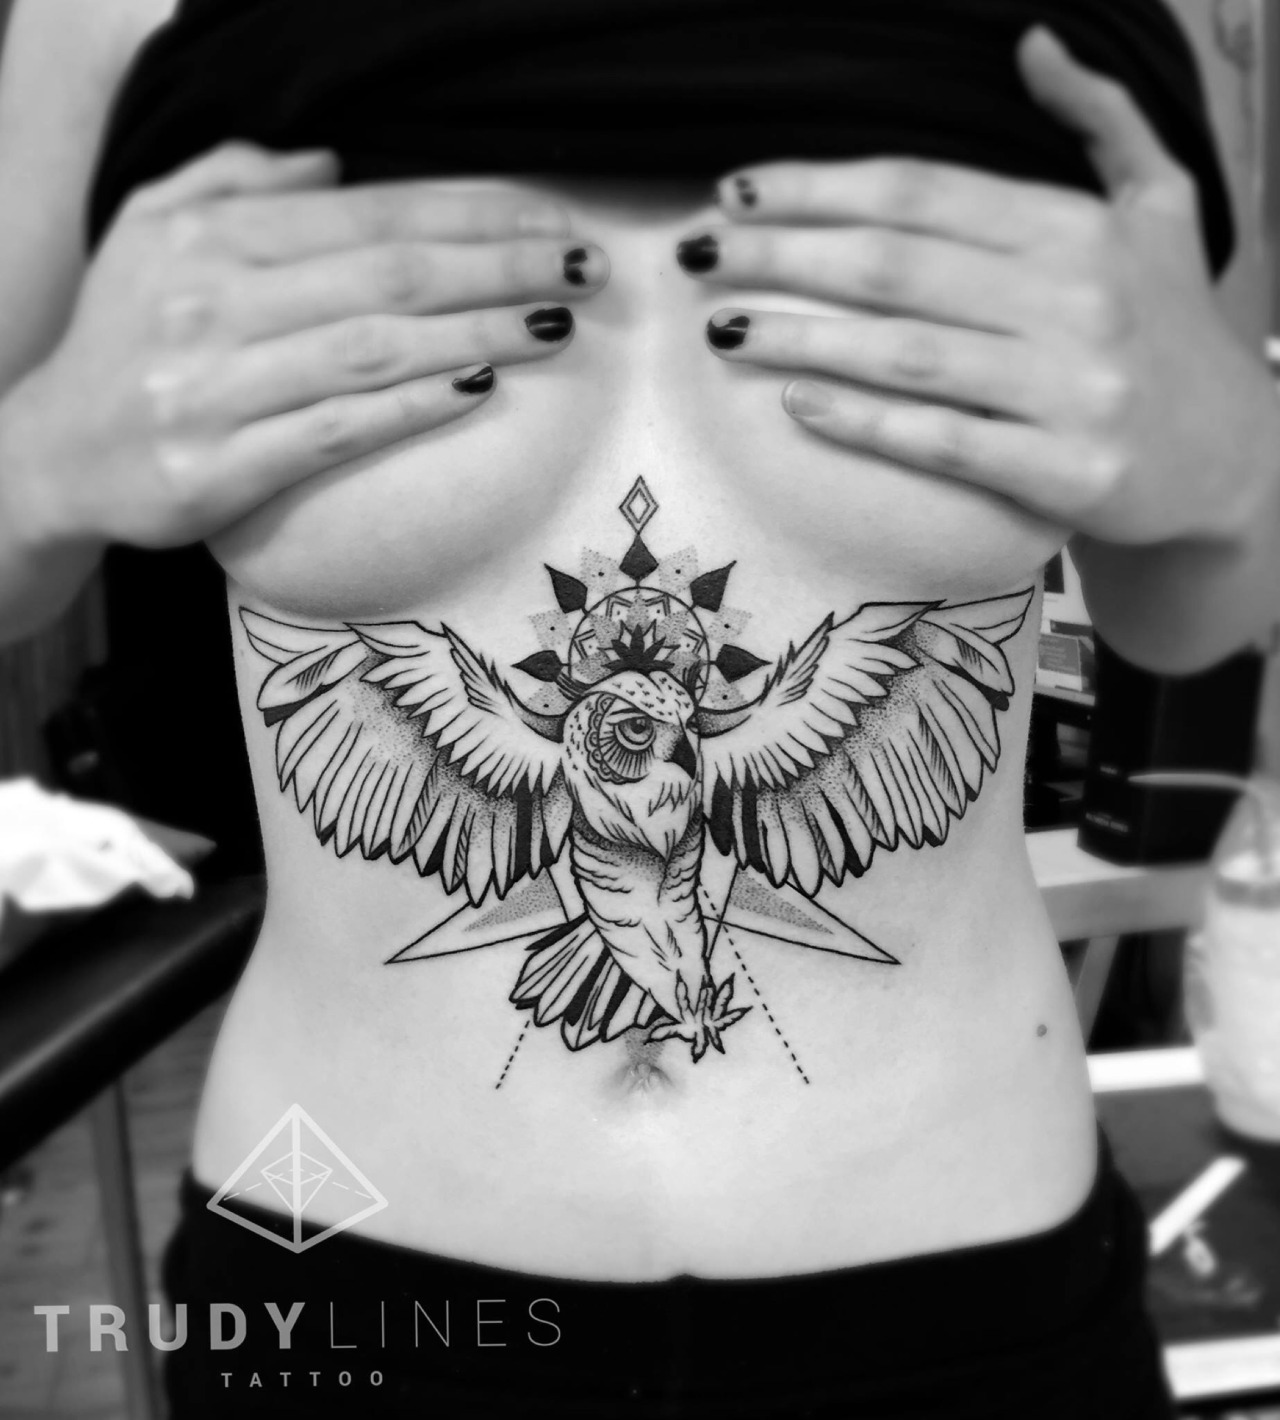 TRUDYLINES traveling tattoo artist — it’s fun to mix the